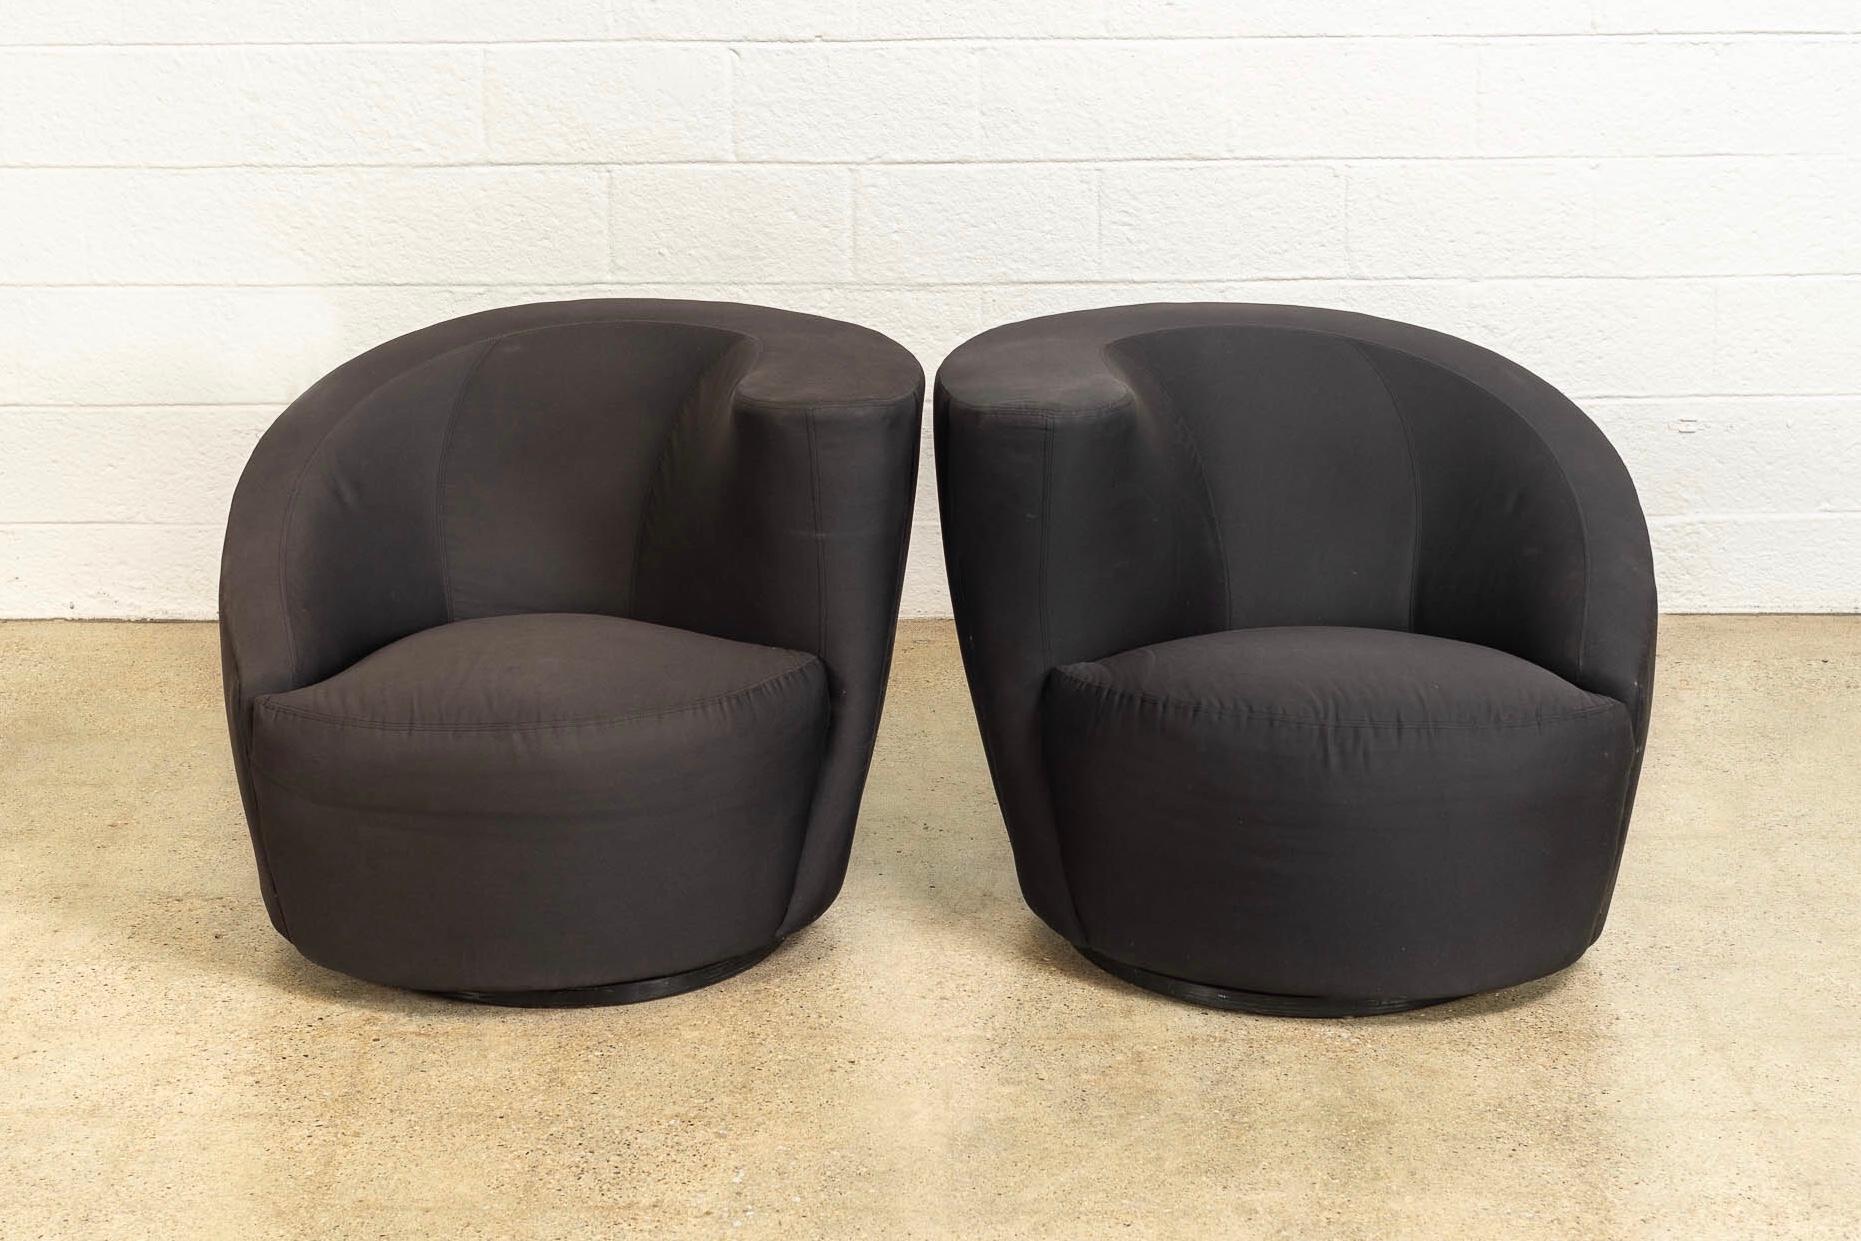 This pair of vintage Mid-Century Modern “Nautilus” club chairs designed by Vladimir Kagan for Directional are circa 1970. The iconic design features classic Kagan style with distinctive curves and elegant organic lines. Upholstered in a black cotton